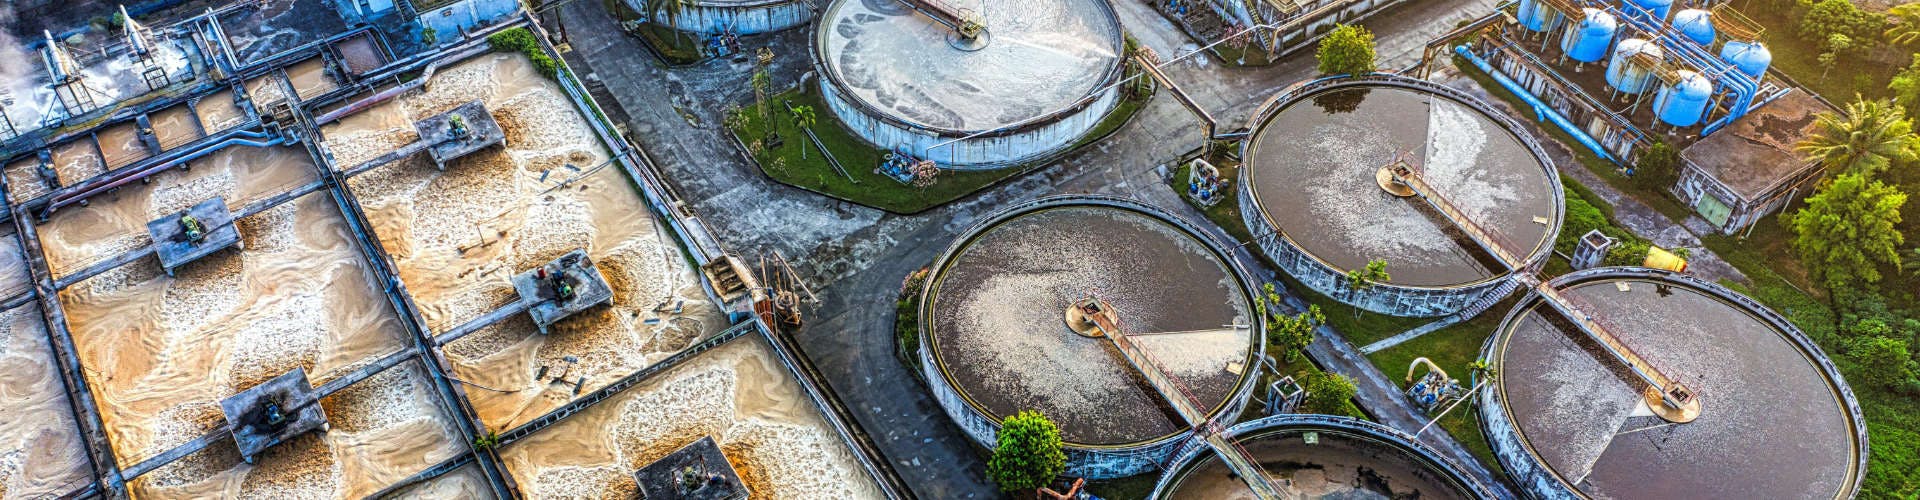 Domestic Wastewater Treatment Plants: Benefits for Wallet and Environment